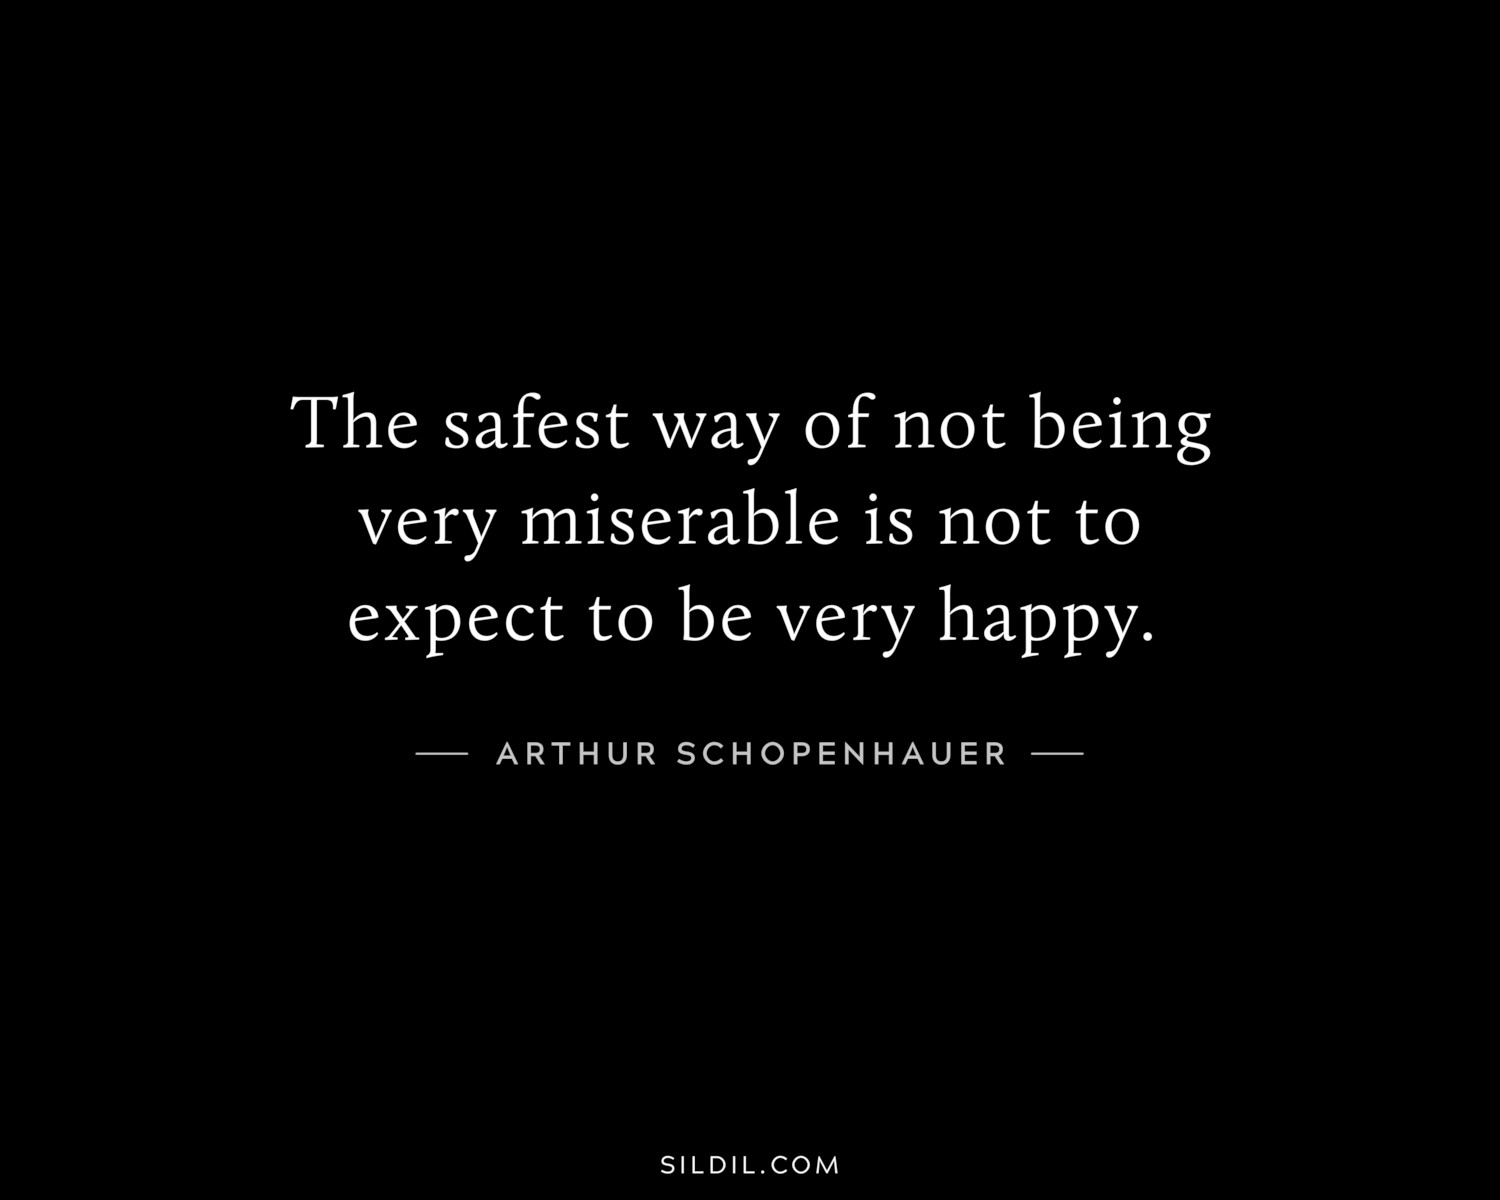 The safest way of not being very miserable is not to expect to be very happy.